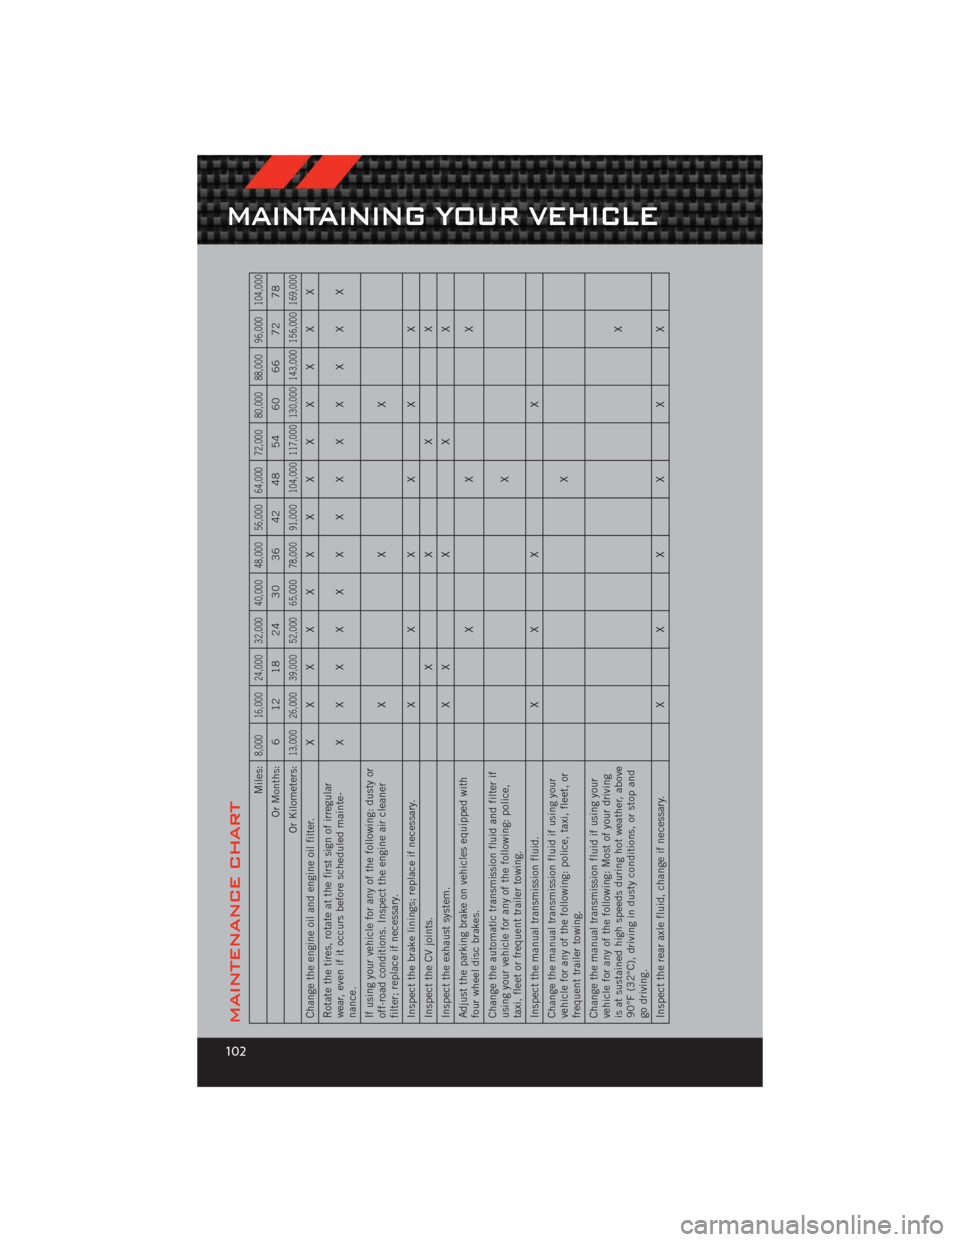 DODGE CHALLENGER 2012 3.G User Guide MAINTENANCE CHART
Miles:
8,000 16,000 24,000 32,000 40,000 48,000 56,000 64,000 72,000 80,000 88,000 96,000 104,000
Or Months: 6 12 18 24 30 36 42 48 54 60 66 72 78
Or Kilometers:
13,000 26,000 39,000